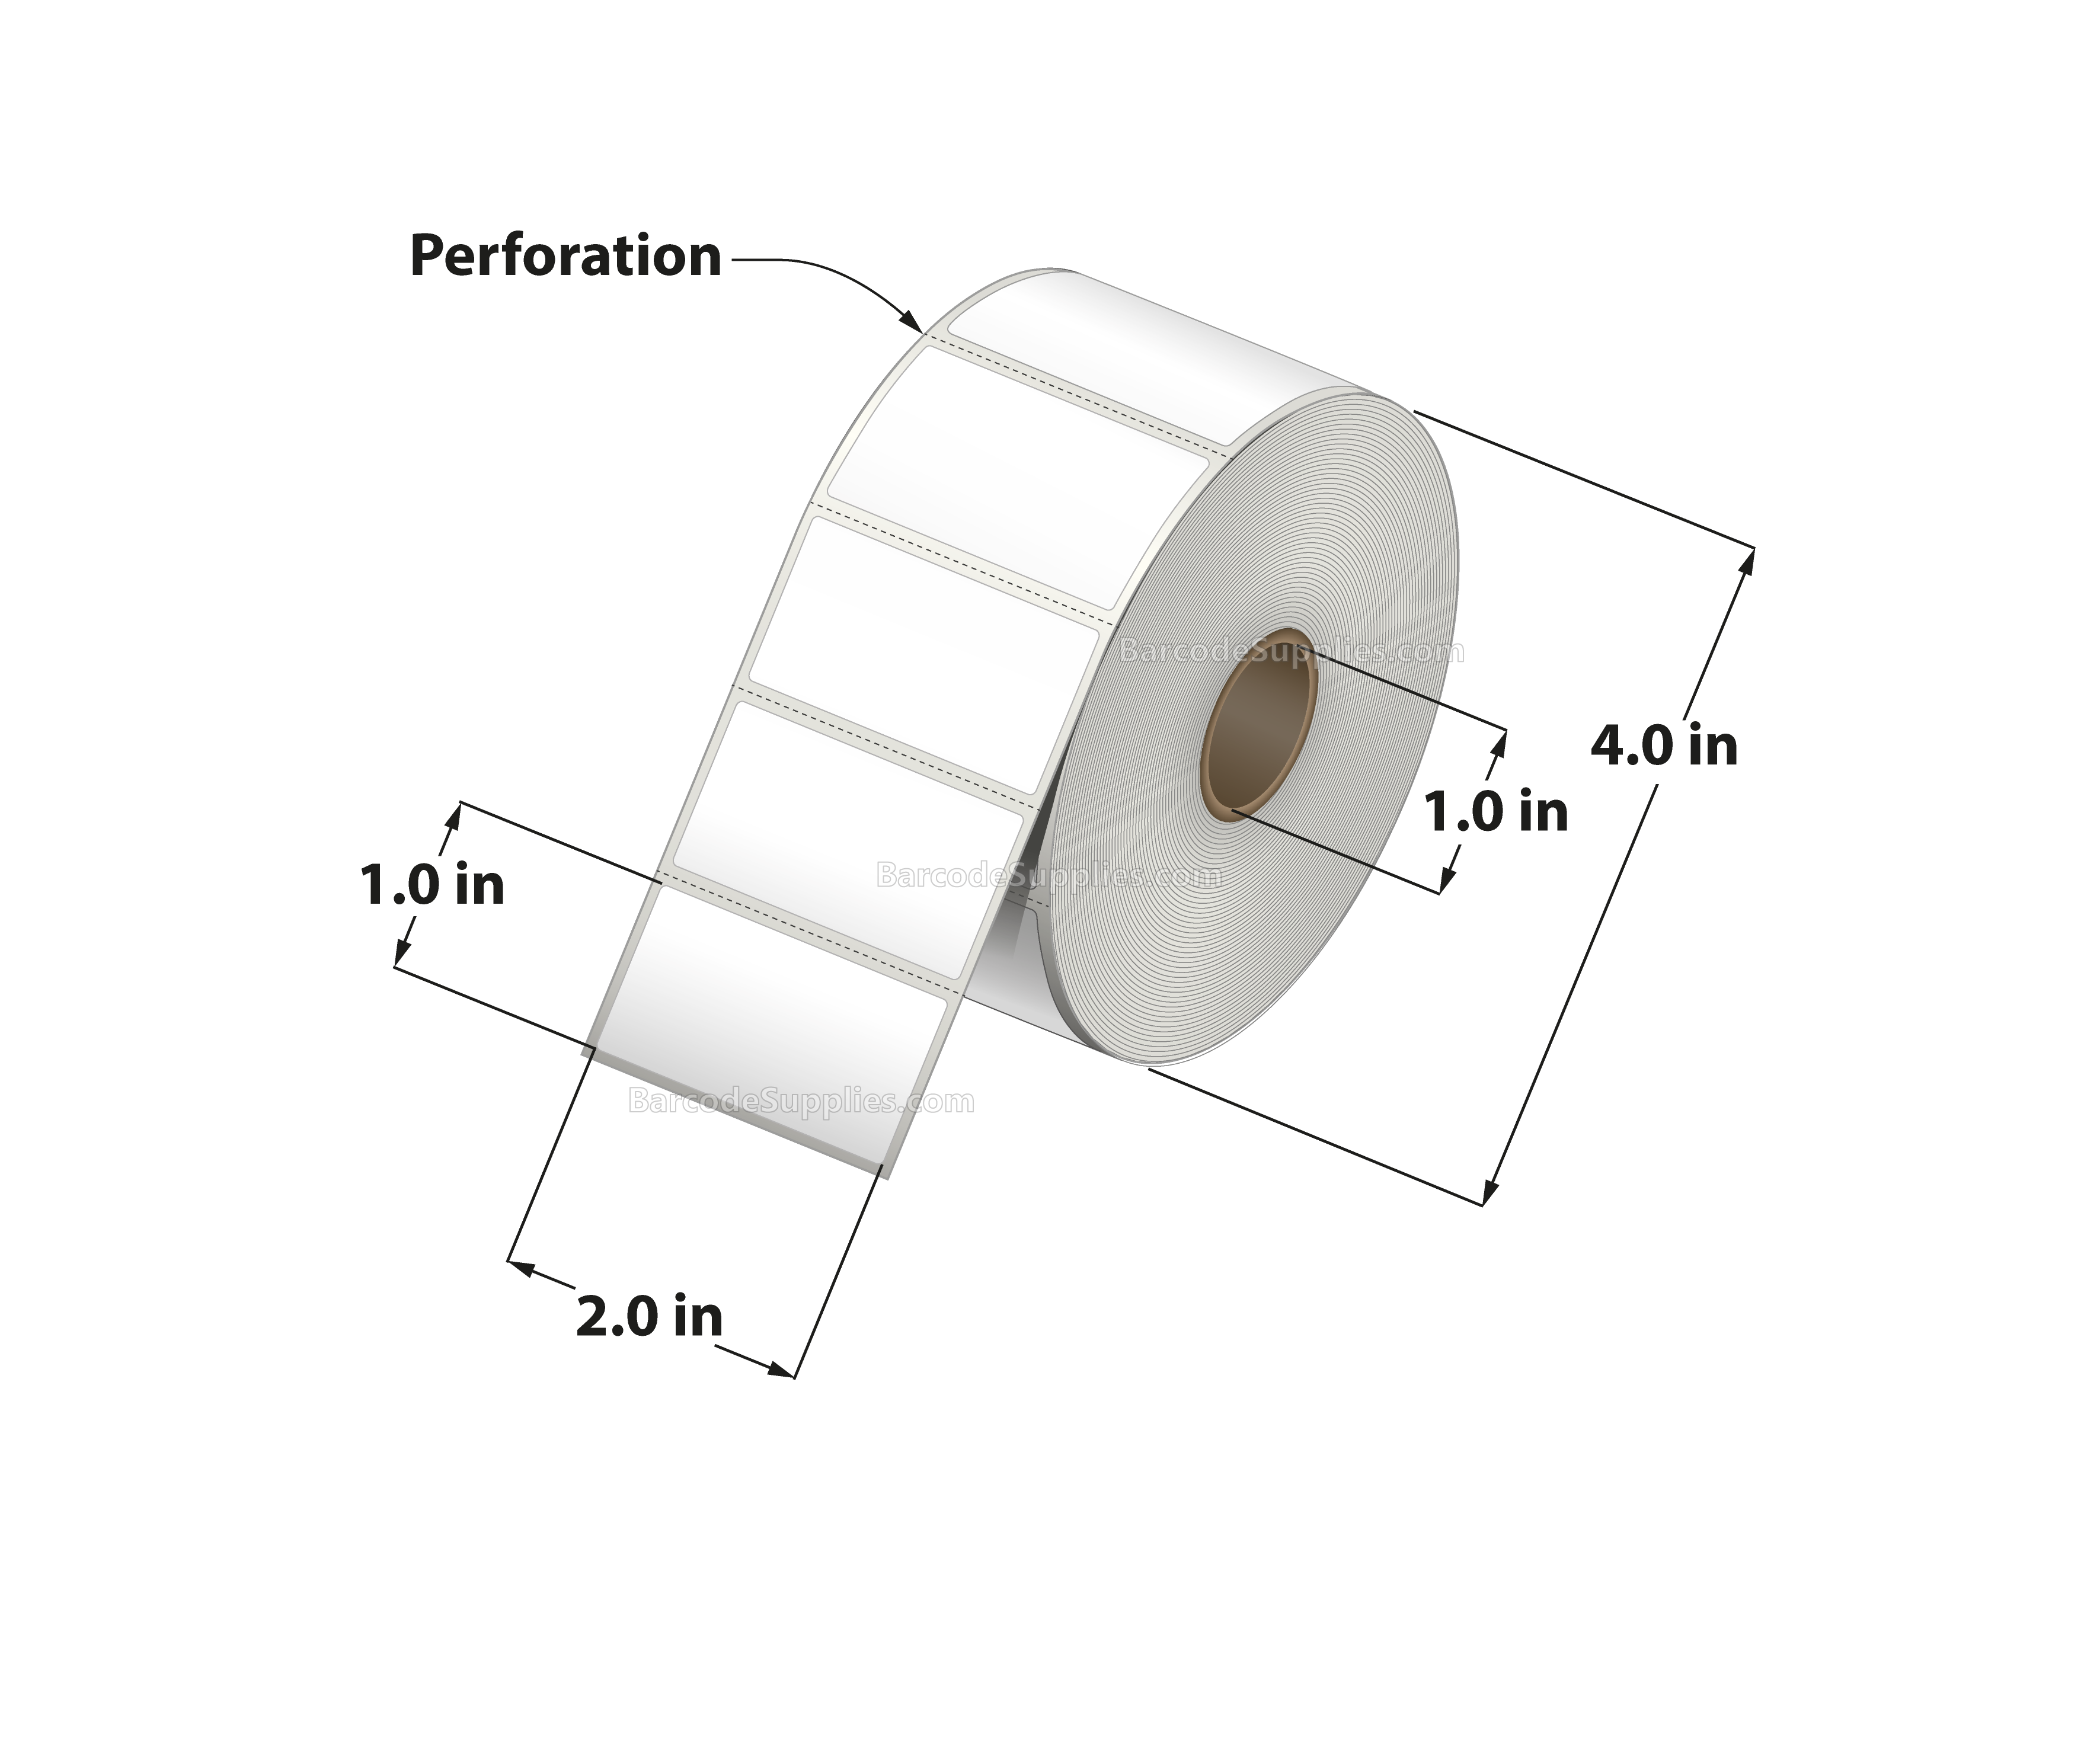 2 x 1 Direct Thermal White Labels With Acrylic Adhesive - Perforated - 1375 Labels Per Roll - Carton Of 12 Rolls - 16500 Labels Total - MPN: RDE-2-1-1375-1 - BarcodeSource, Inc.